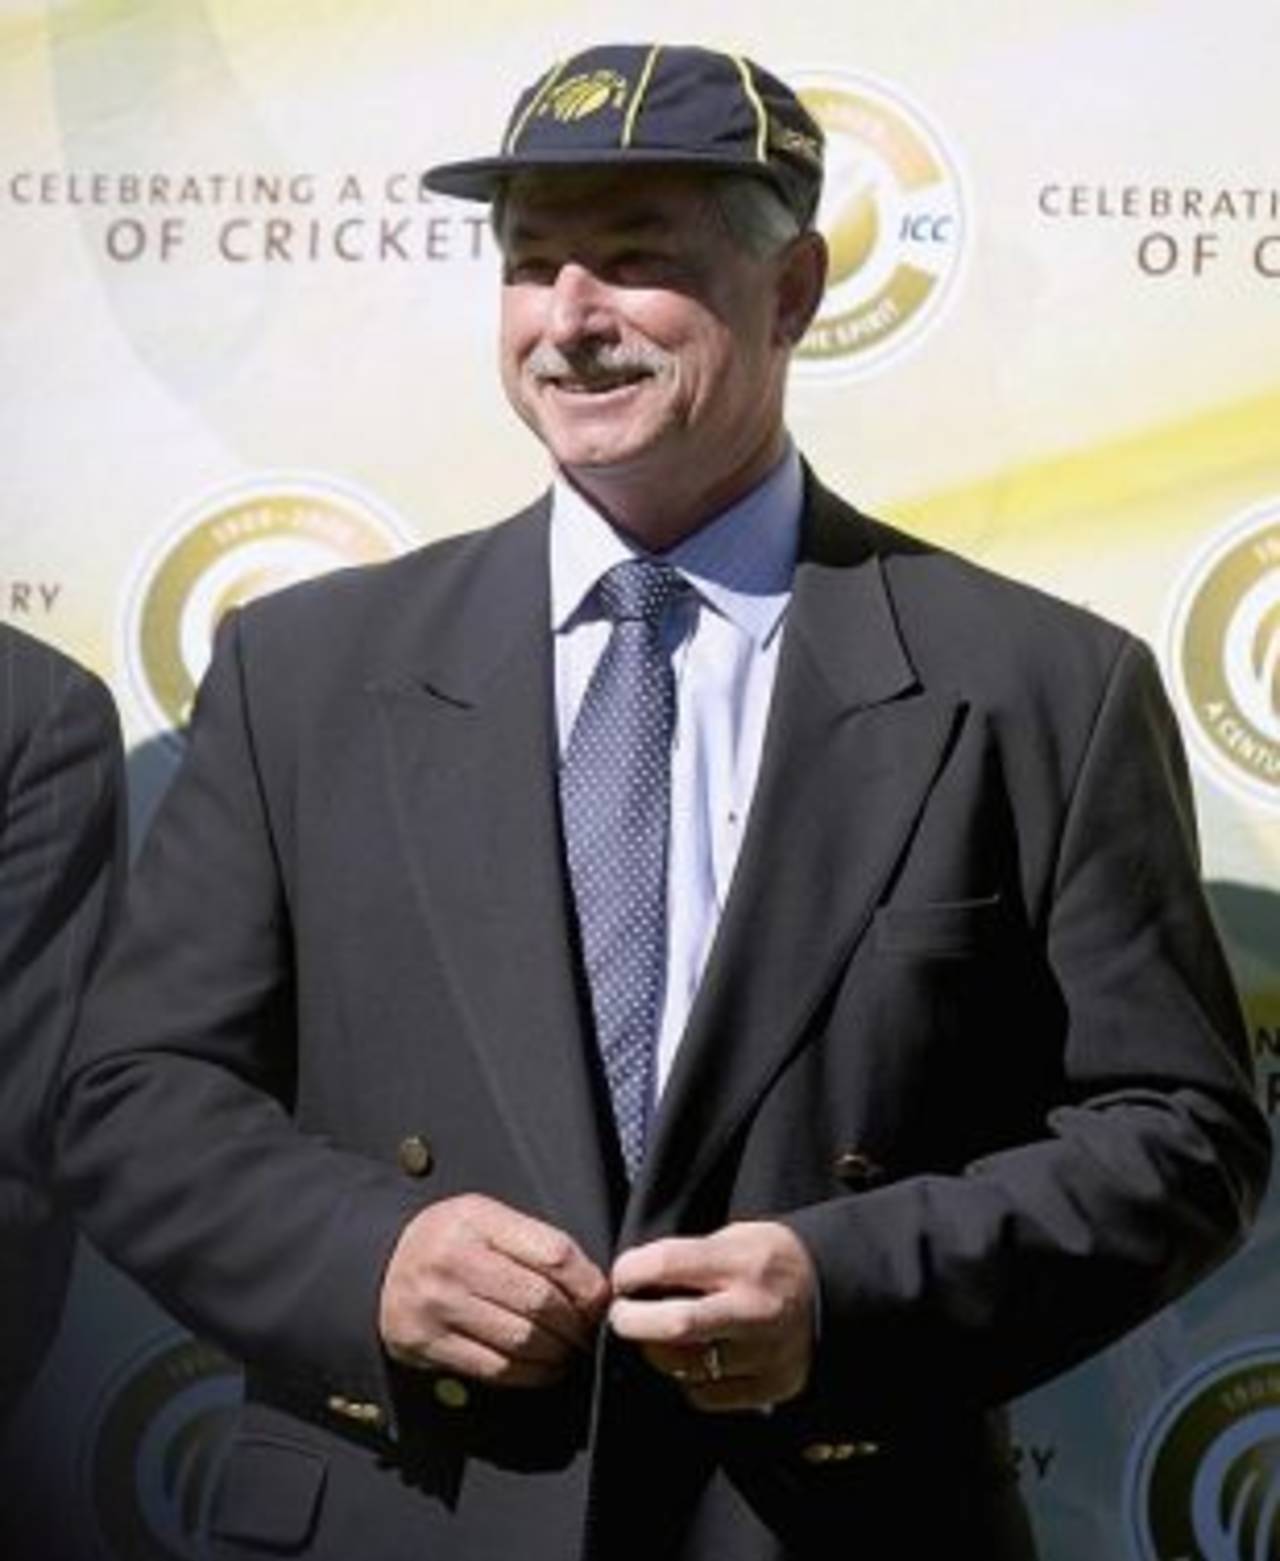 Richard Hadlee joins the ICC's hall of fame, New Zealand v India, 3rd Test, Wellington, 1st day, April 3, 2009